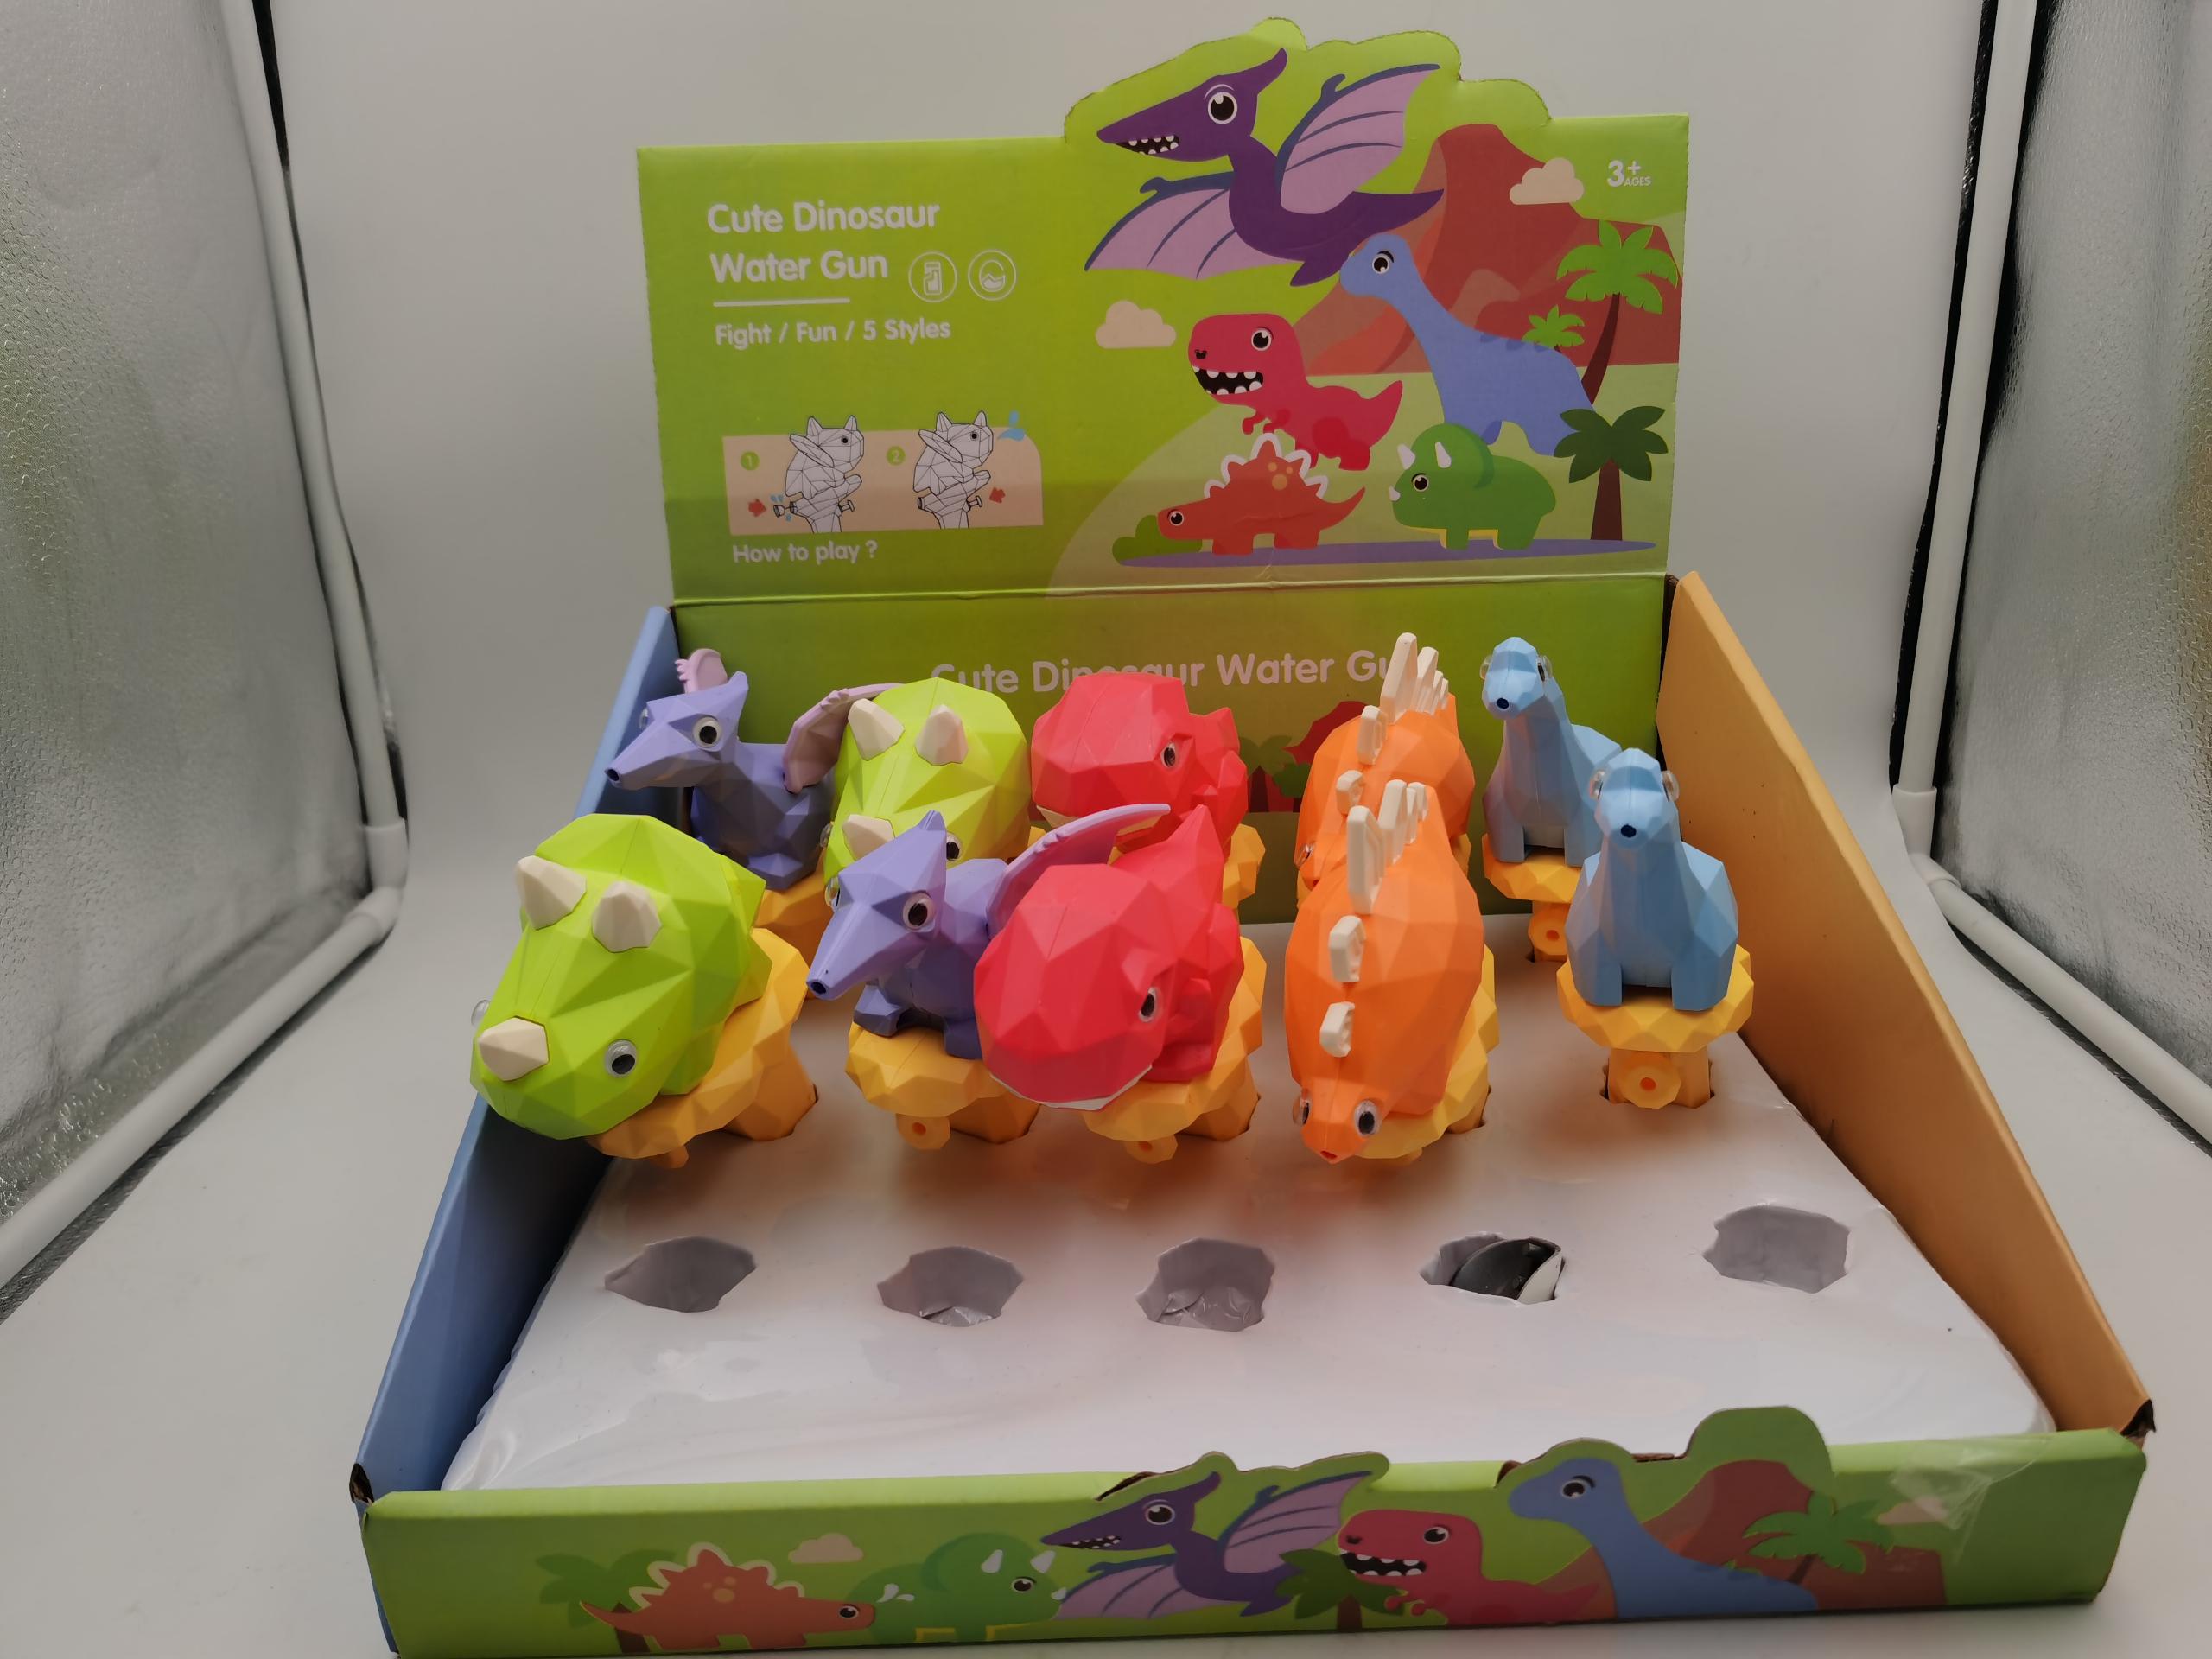 MINISO 5.5IN. SMALL DINOSAUR WATER GUN ( 5 ASSORTED MODELS ) 2012313510105 PLASTIC TOYS